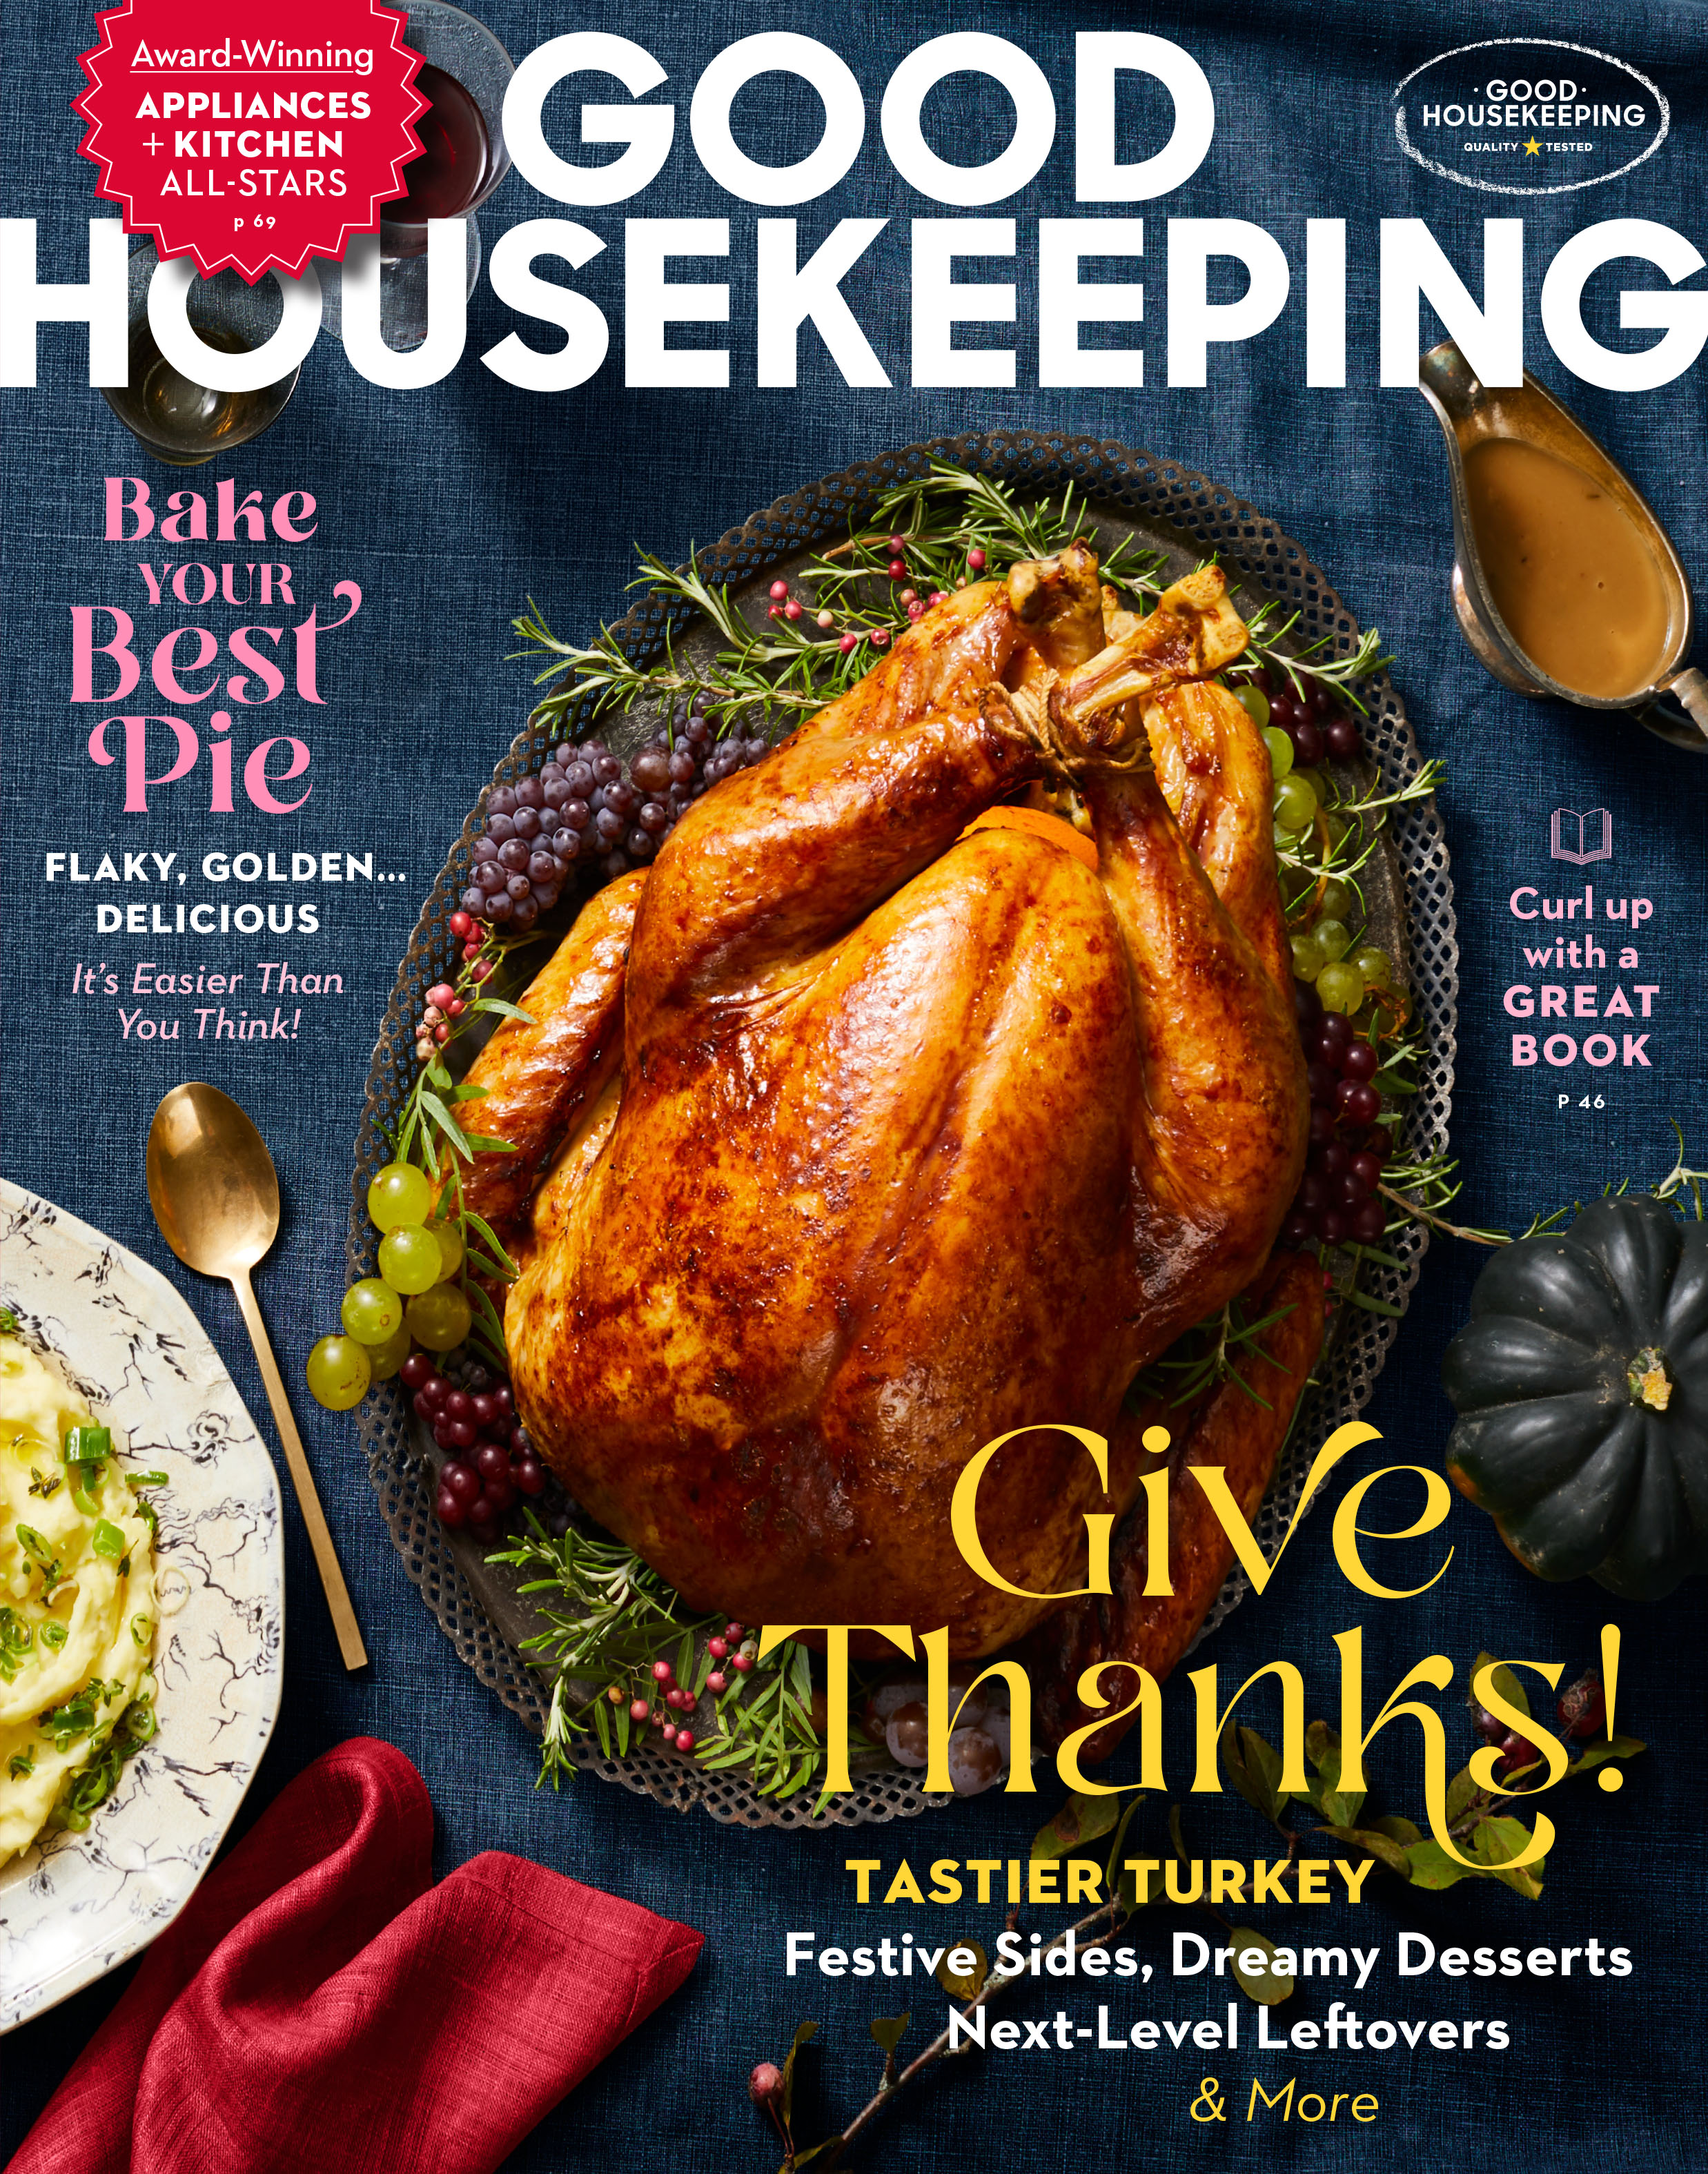 Good Housekeeping - General Excellence, Service and Lifestyle